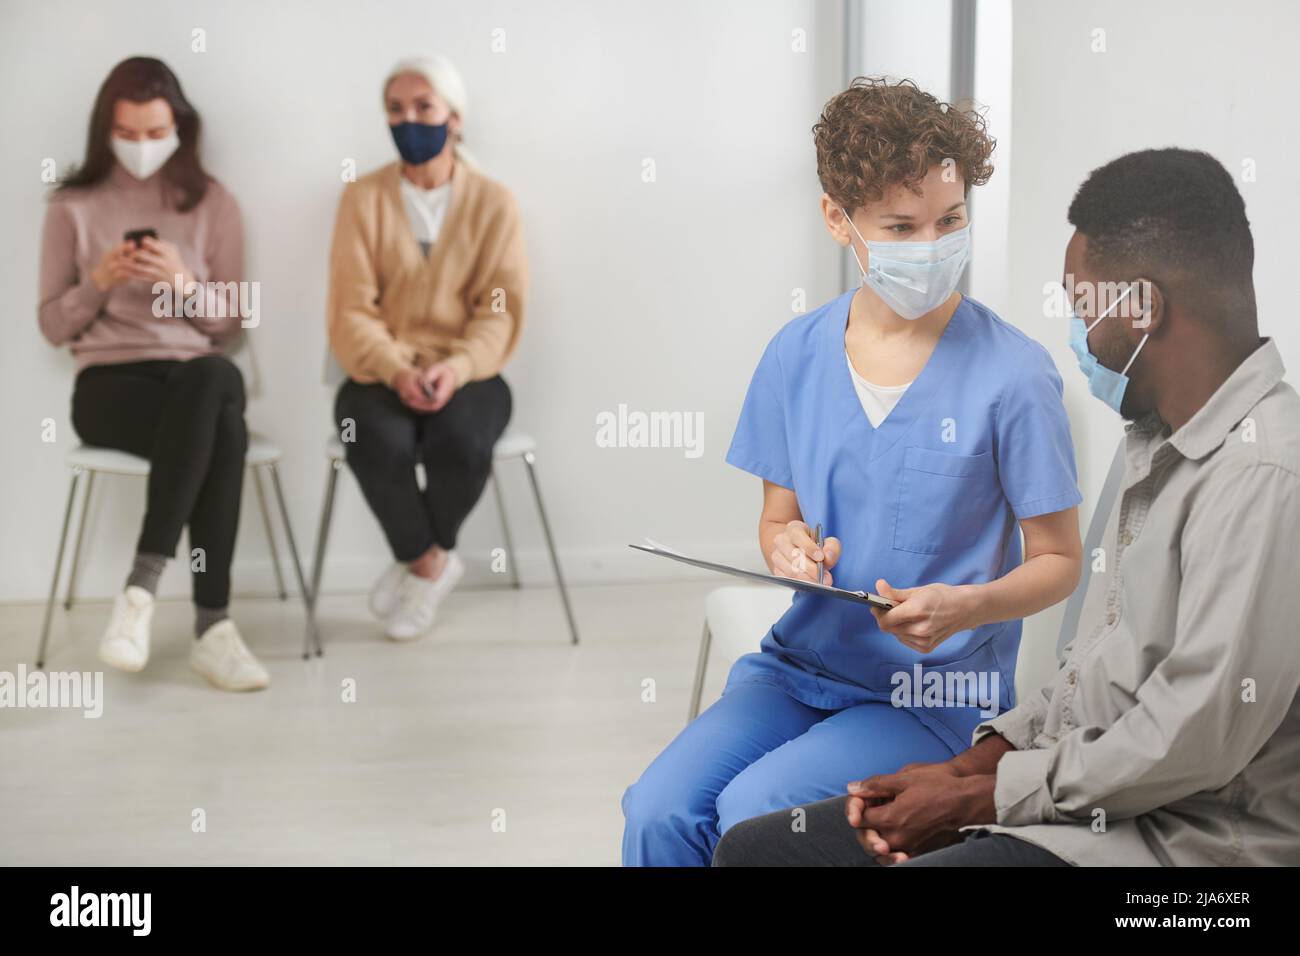 Horizontal shot of unrecognizable medical worker wearing mask sitting on chair in corridor next to patient asking him questions and making notes Stock Photo